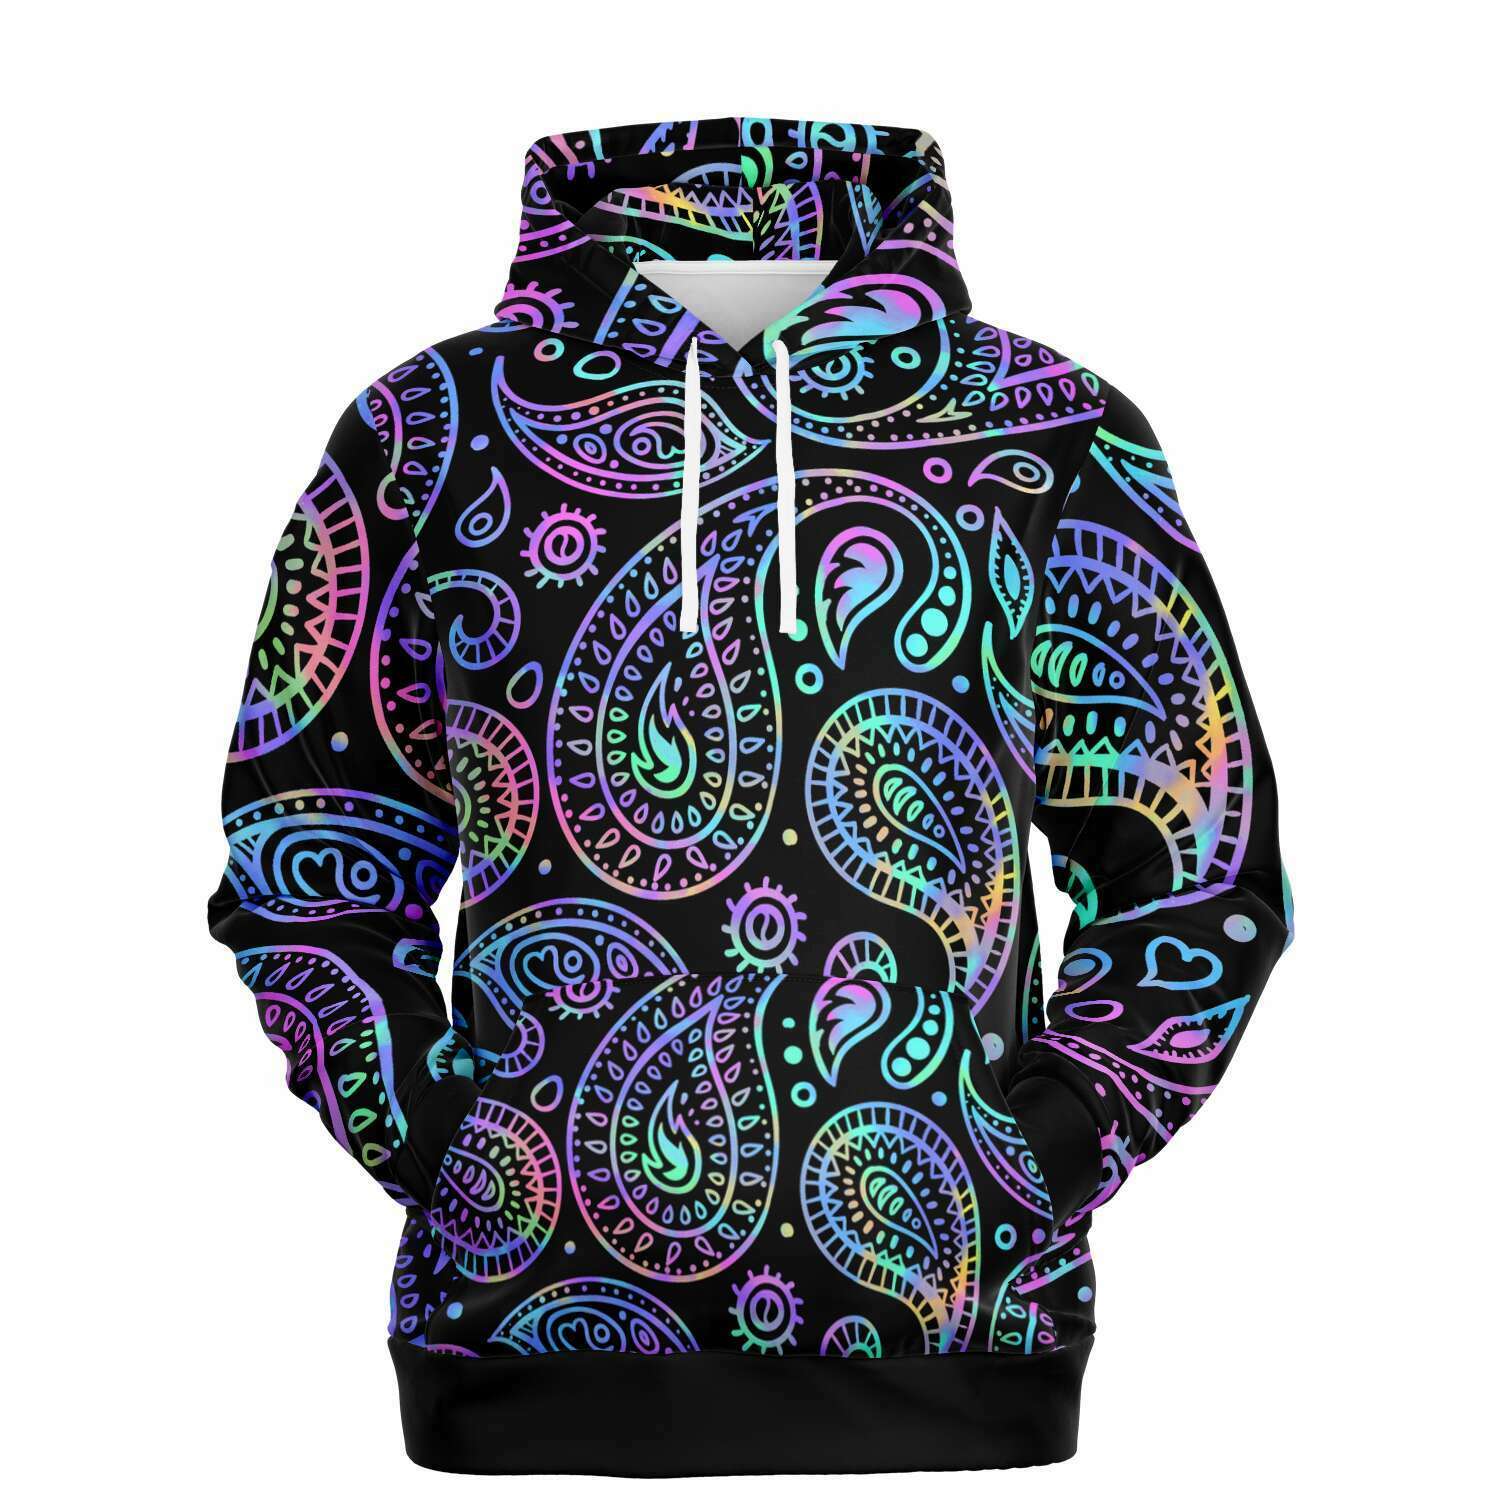 all over print hoodie with a colorful paisley pattern on it